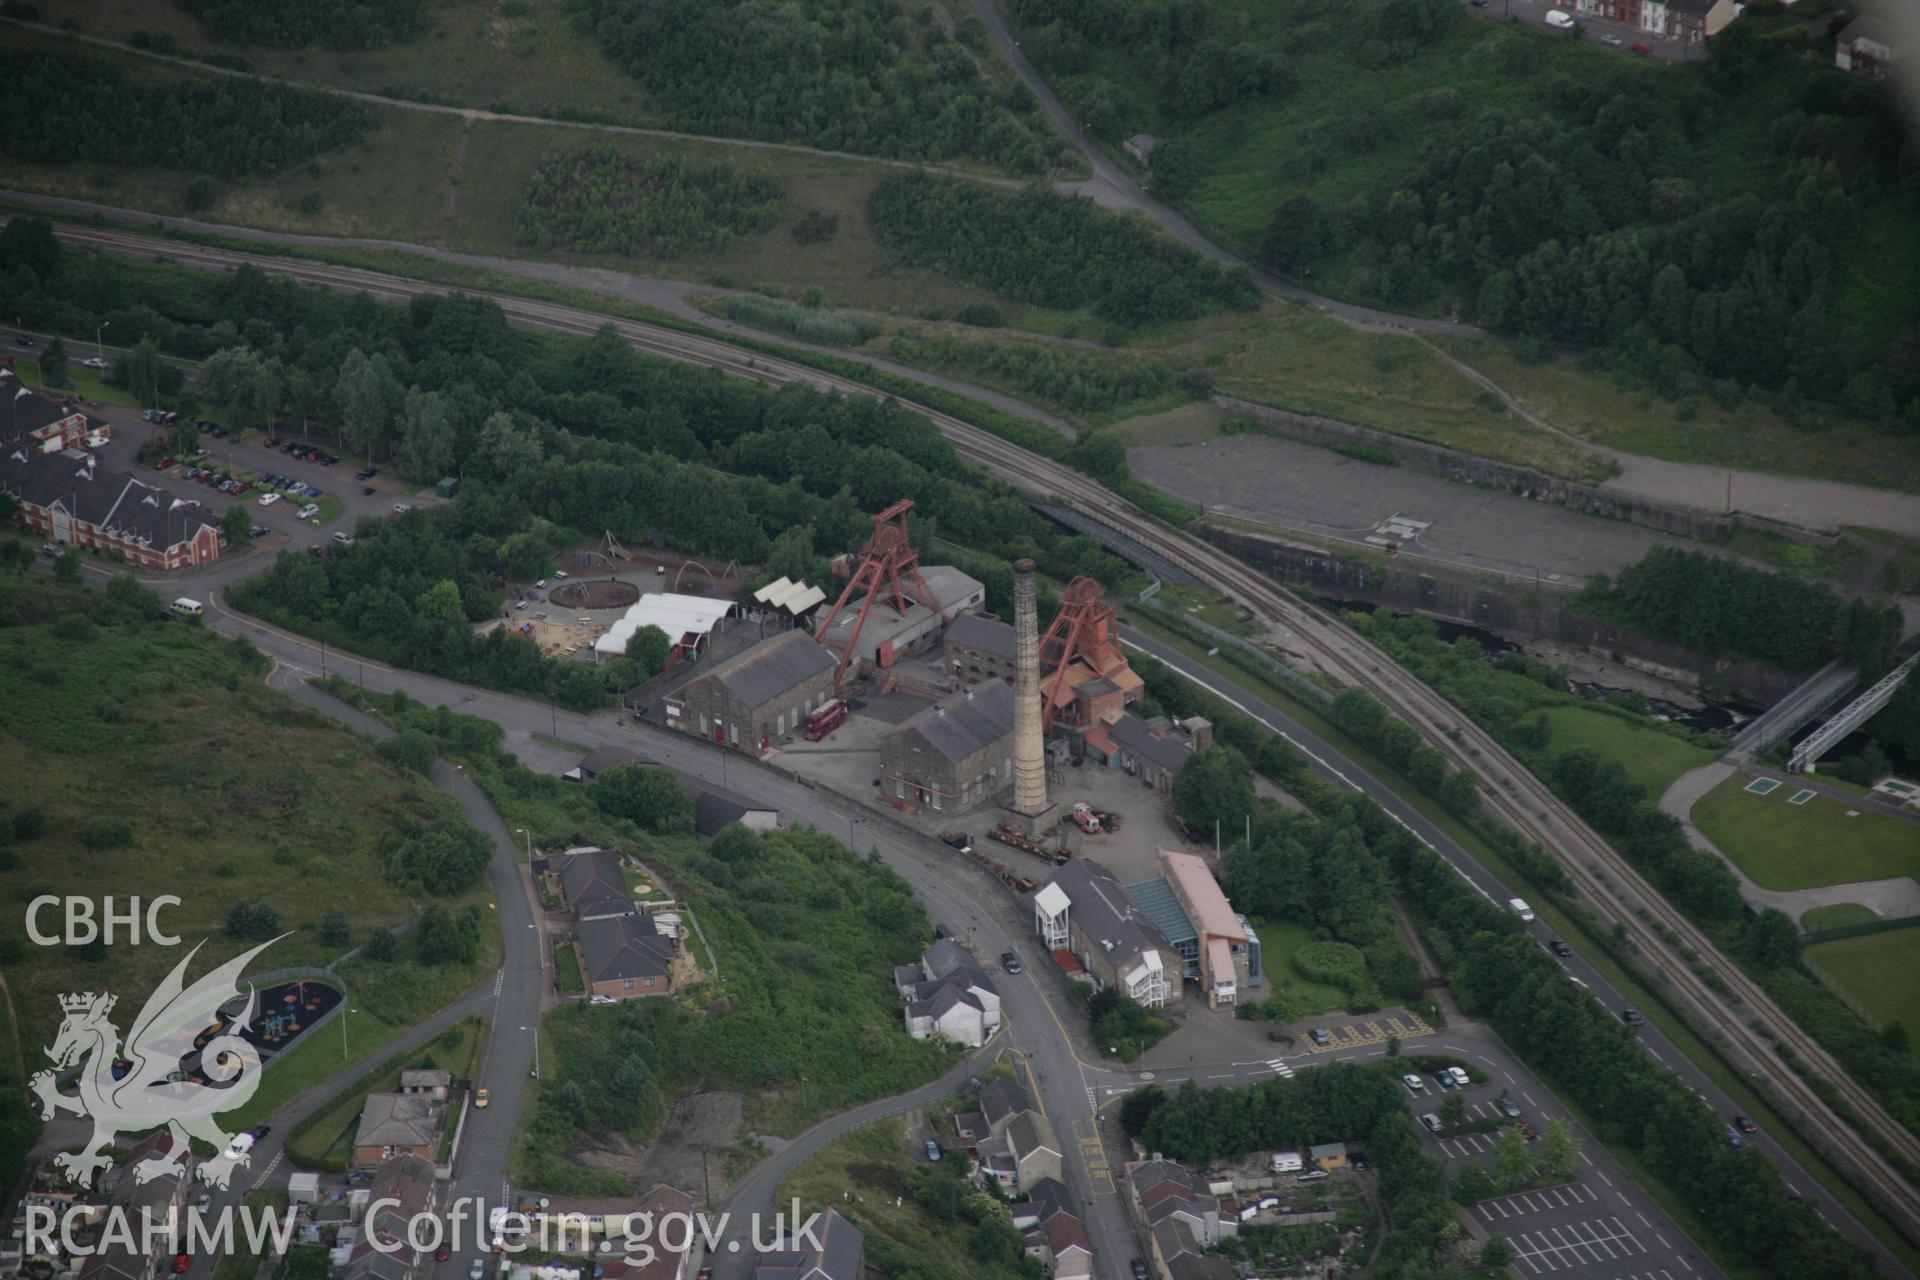 RCAHMW digital colour oblique photograph of Rhondda Heritage Park viewed from the east. Taken on 07/07/2005 by T.G. Driver.